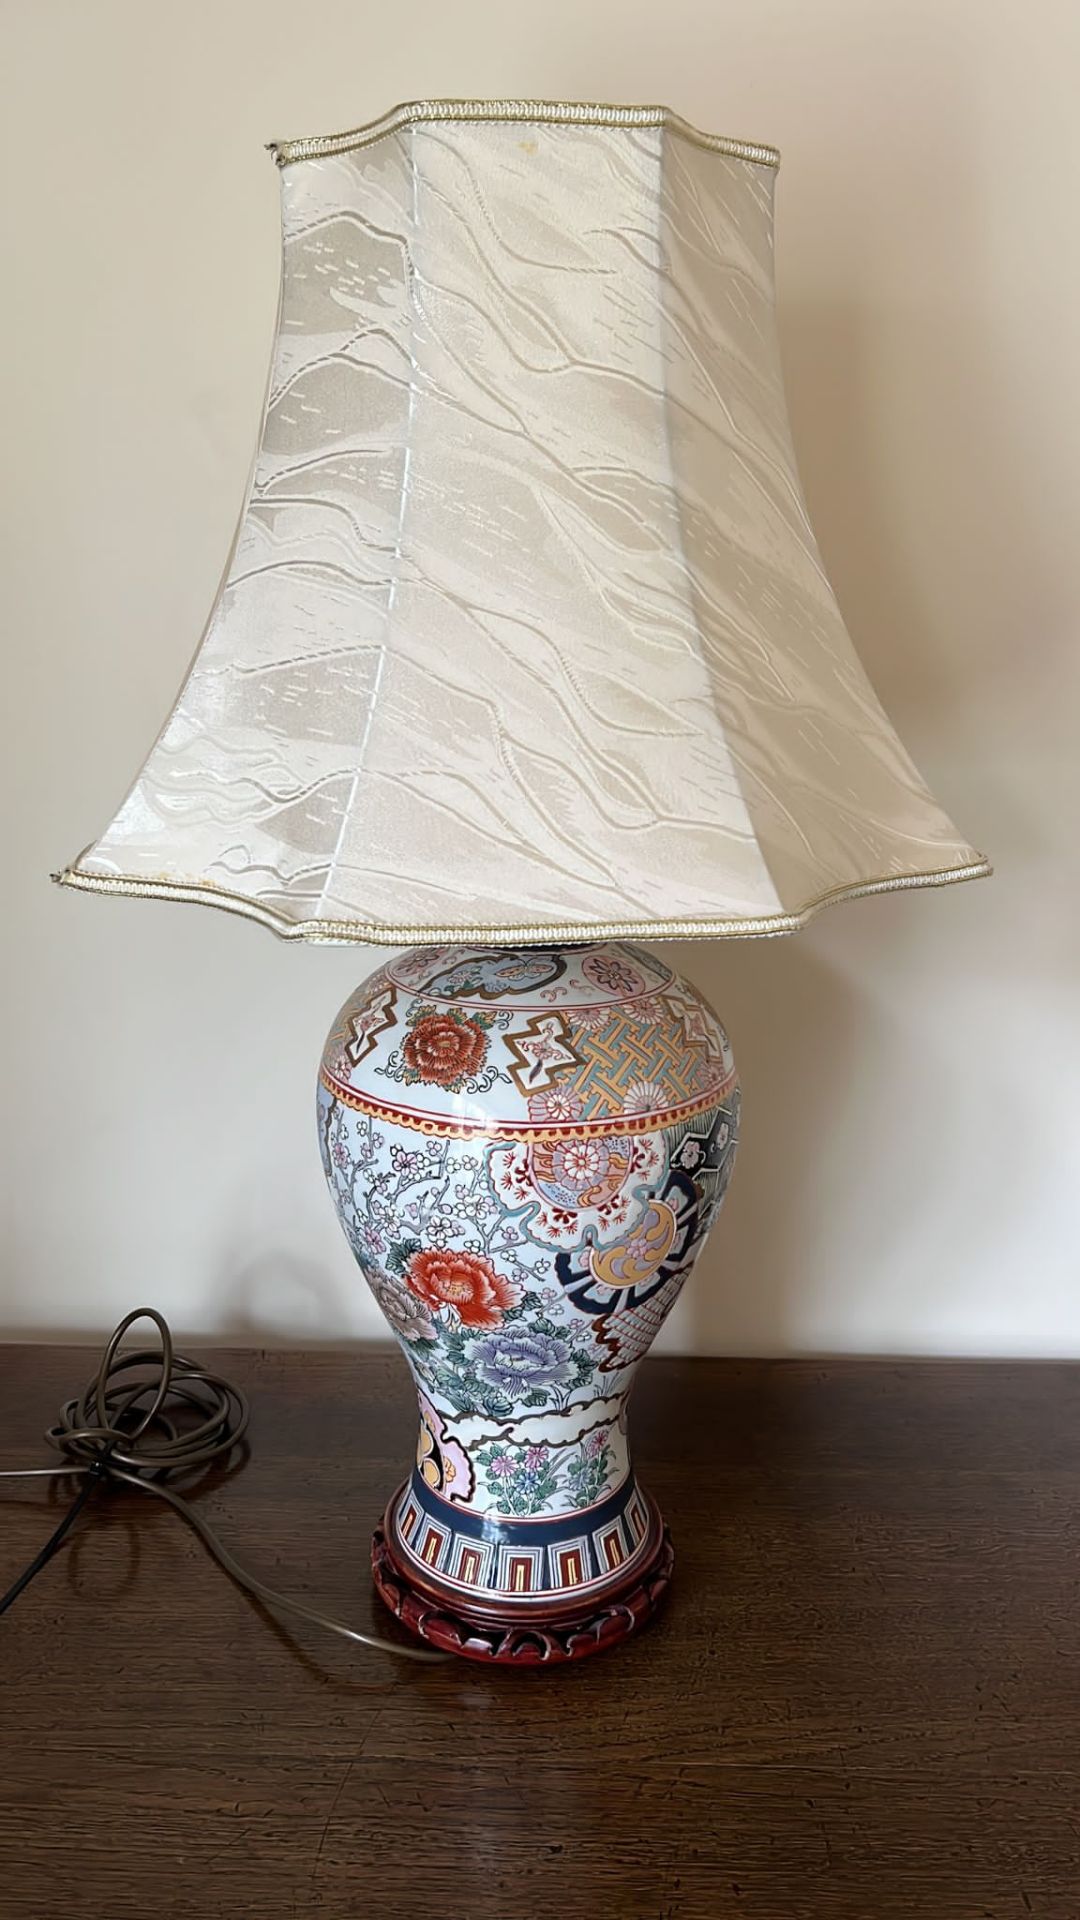 A CHINESE ENAMEL DESIGN TABLE LAMP WITH GEOMETRIC AND FLORAL DESIGNS, ON CARVED WOODEN BASE AND - Image 5 of 5